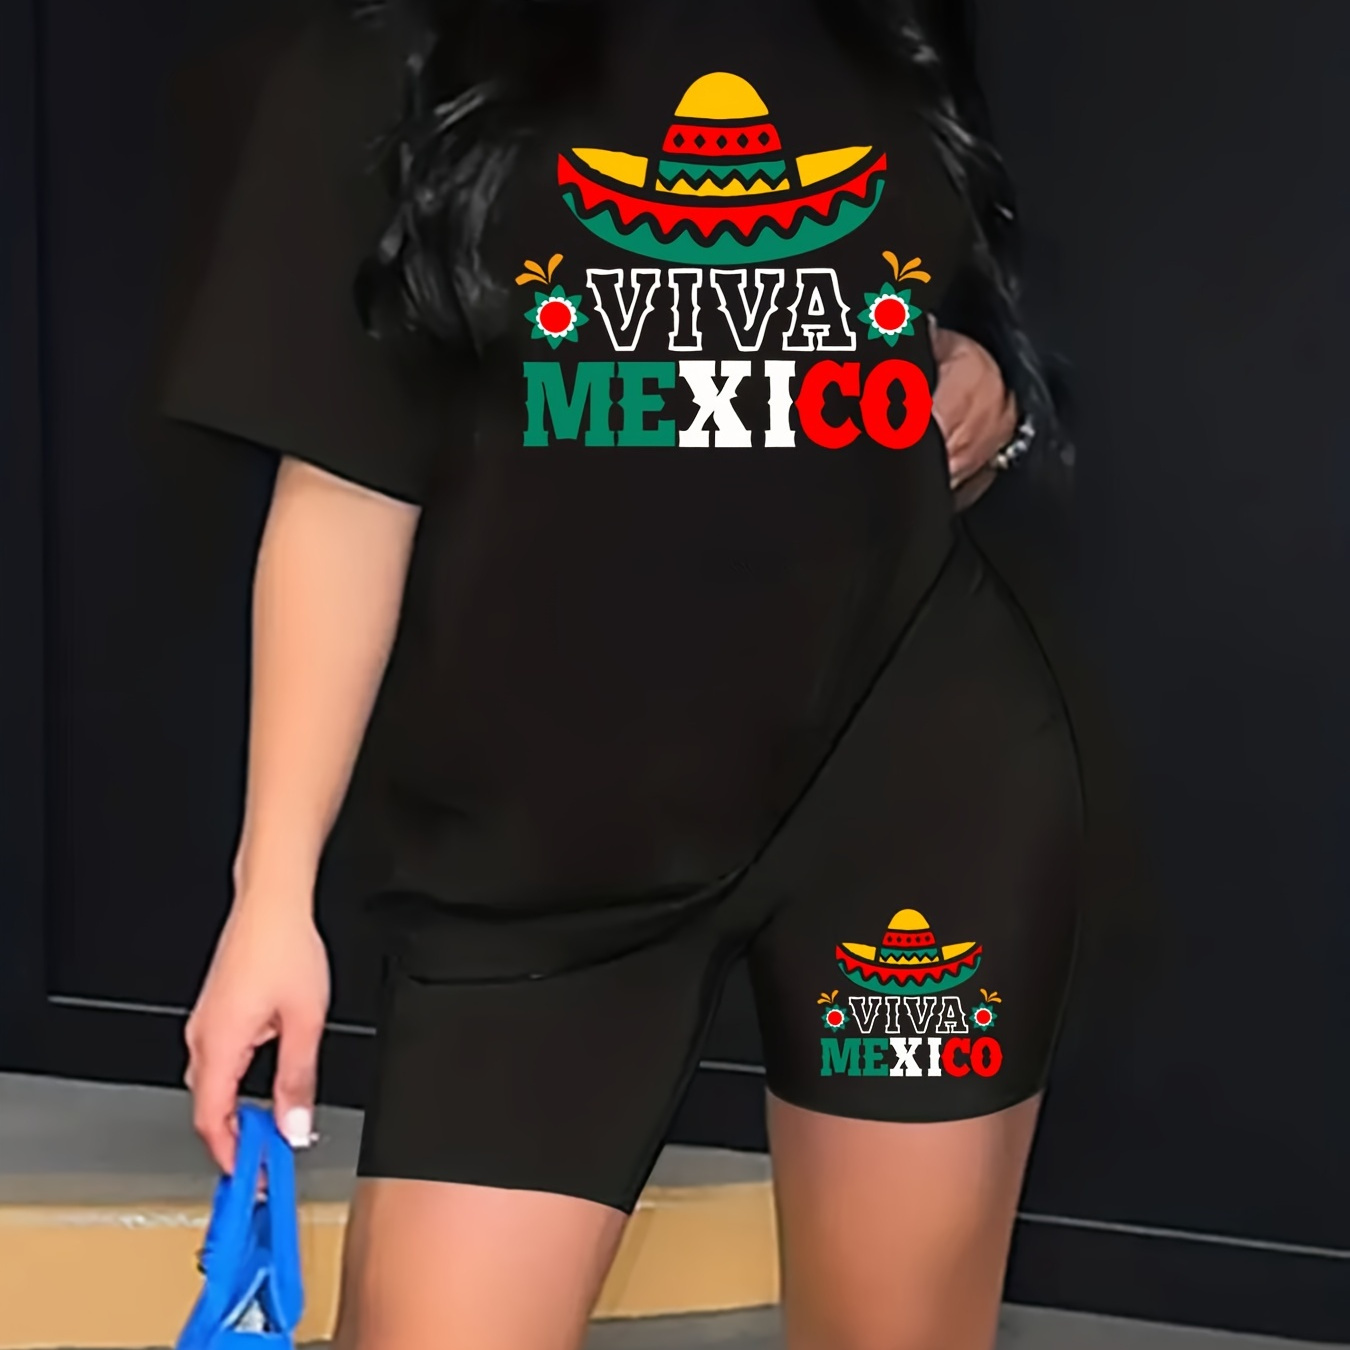 

Mexico Hat & Letter Print Two-piece Set, Casual Short Sleeve T-shirt & Biker Shorts Outfits, Women's Clothing